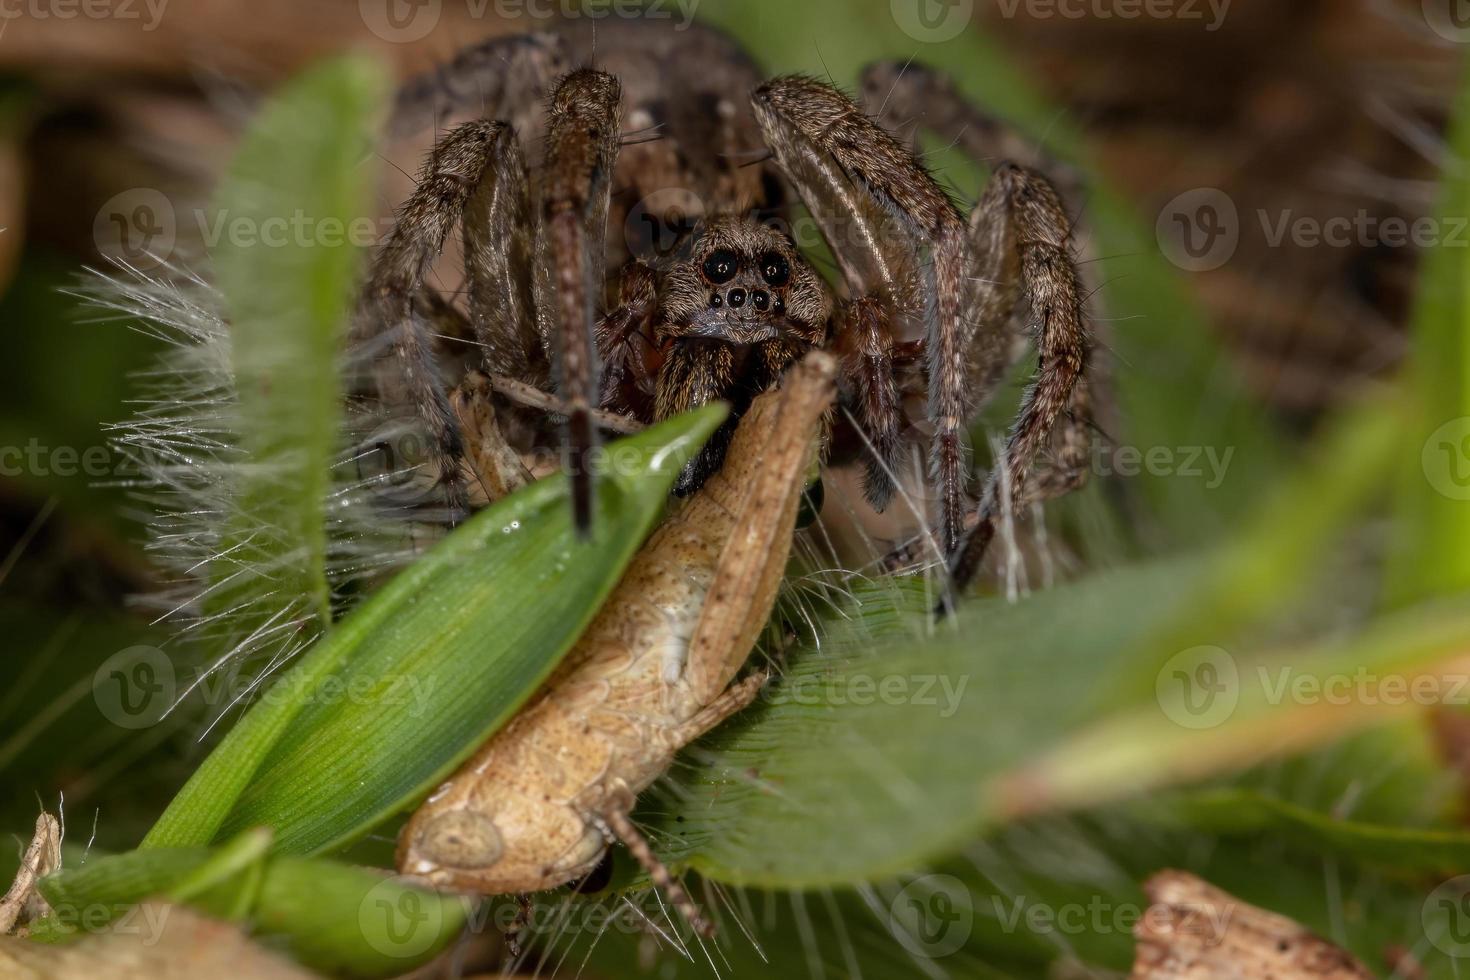 Adult Wolf Spider preying on a short-horned grasshopper nymph photo